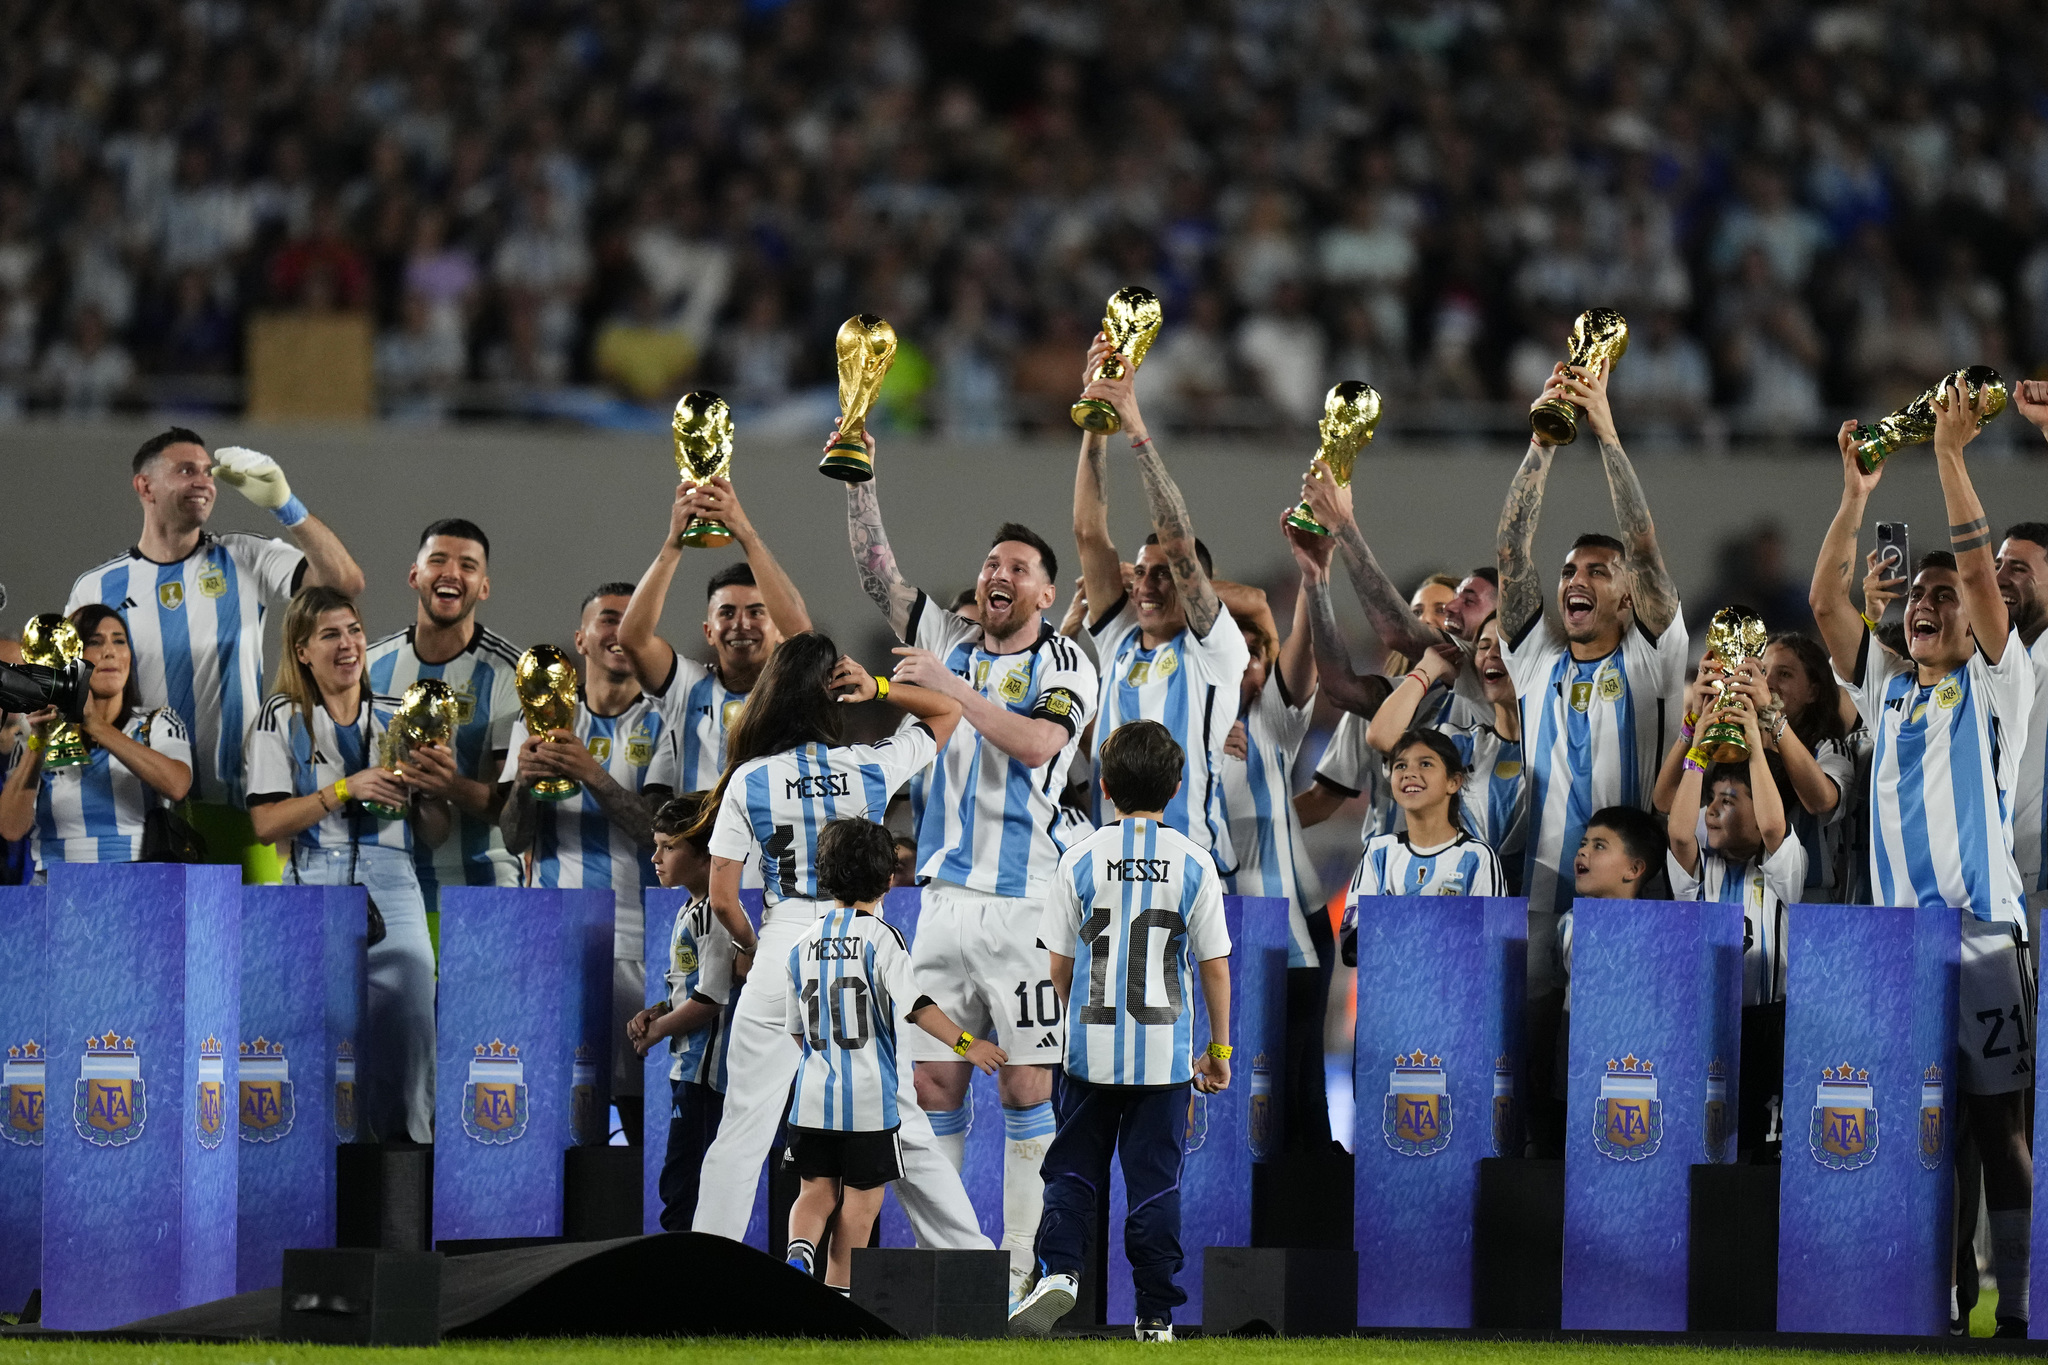 Argentina's first game in the country since winning the World Cup.